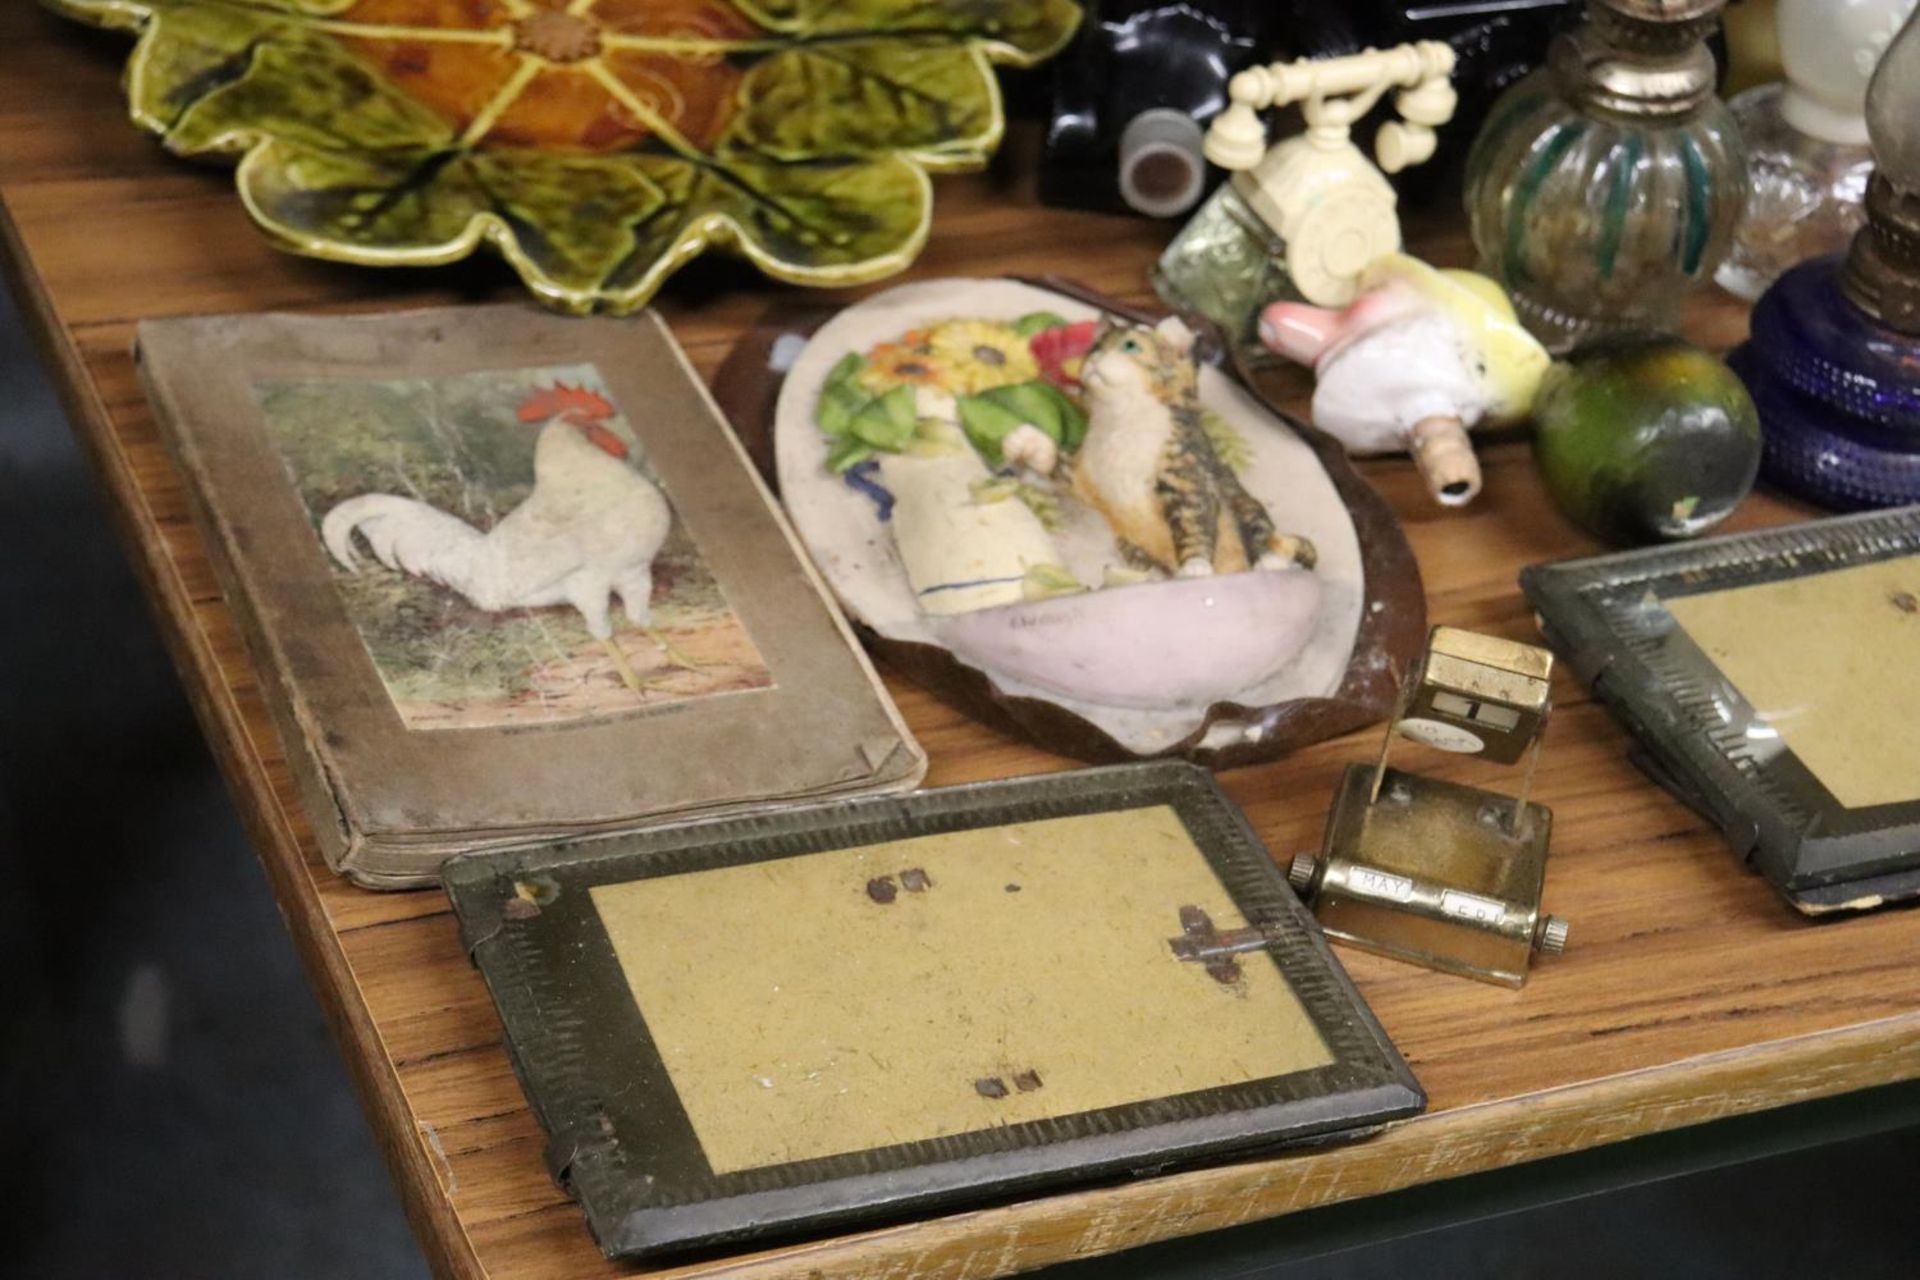 A QUANTITY OF ITEMS TO INCLUDE VINTAGE AVON BOTTLES, A FRAMED PRINT, MINI OIL LAMPS, PHOTO FRAMES, - Image 5 of 6